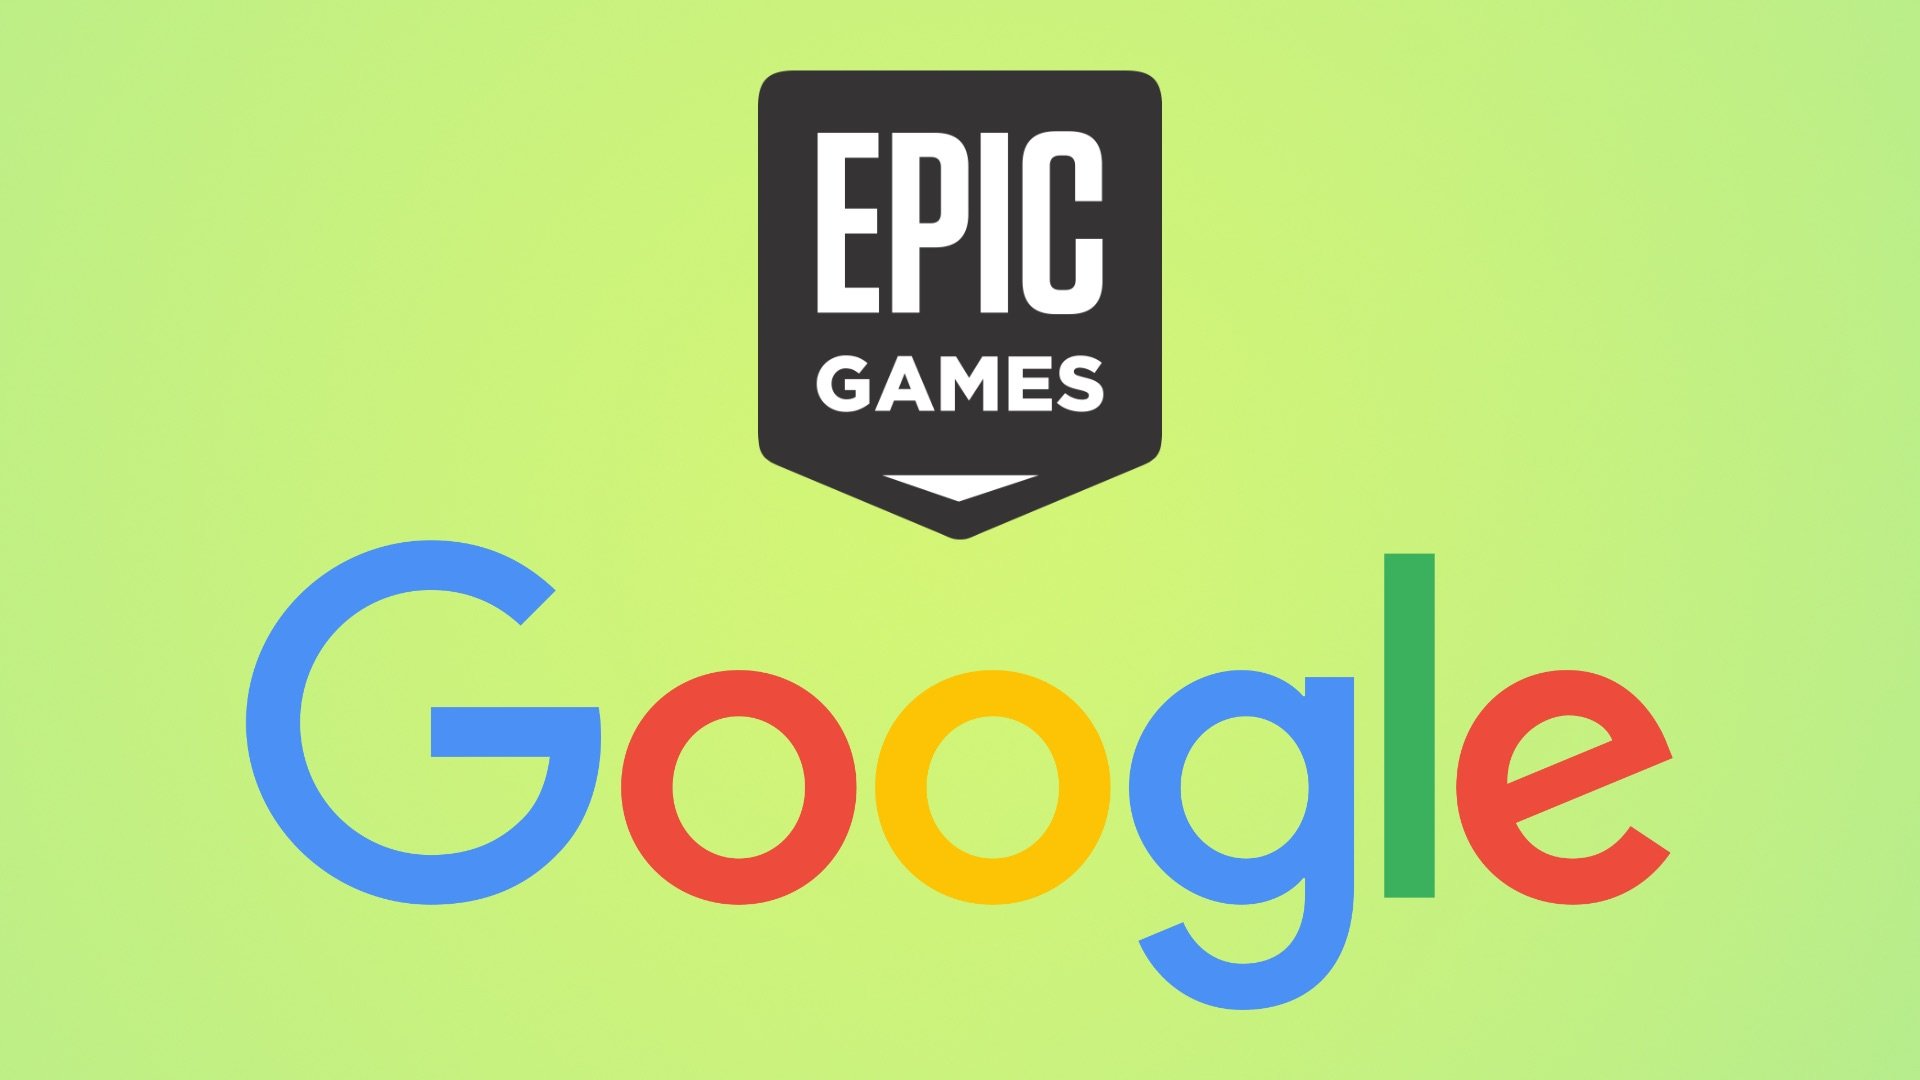 Epic Games wins antitrust fight against Google's Play Store